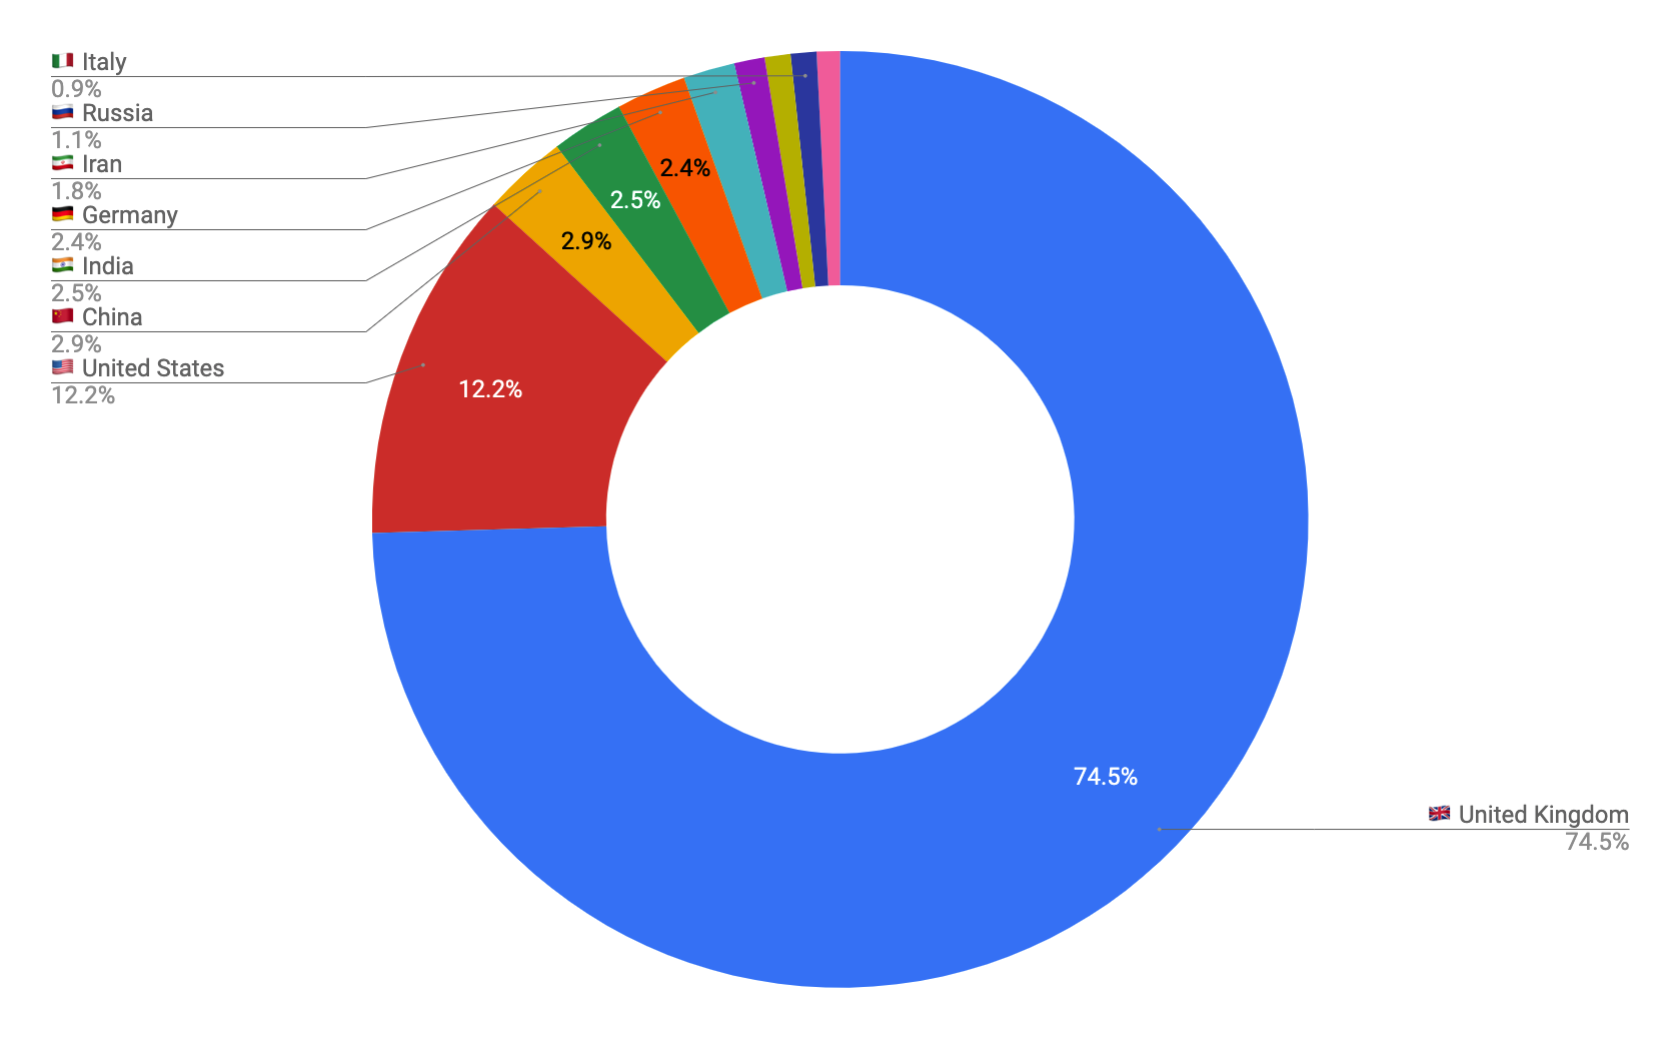 Pie chart showing unique page views for alternative stream page